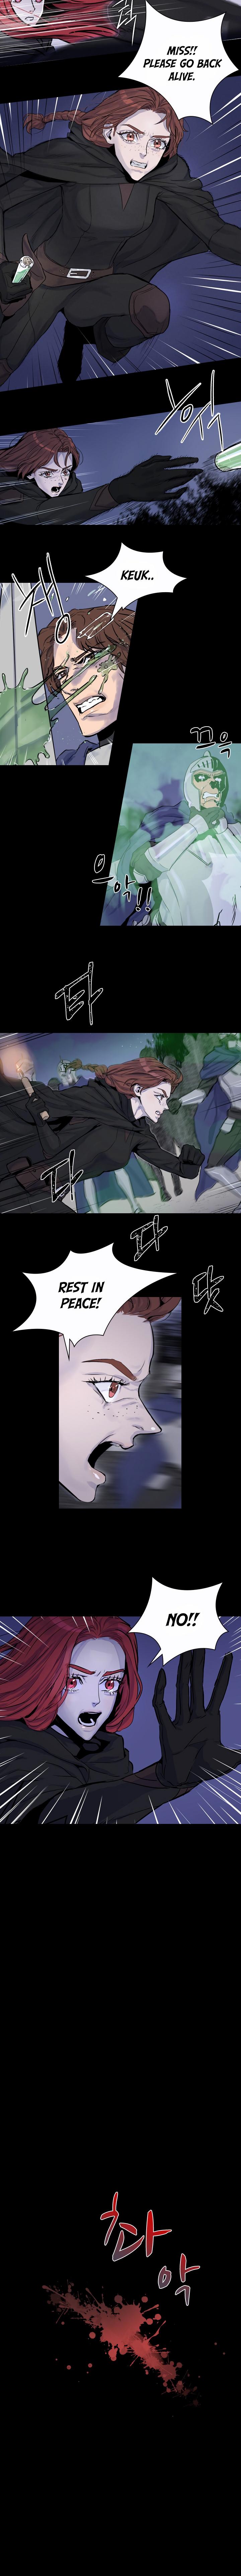 Aideen - Chapter 1 Page 11